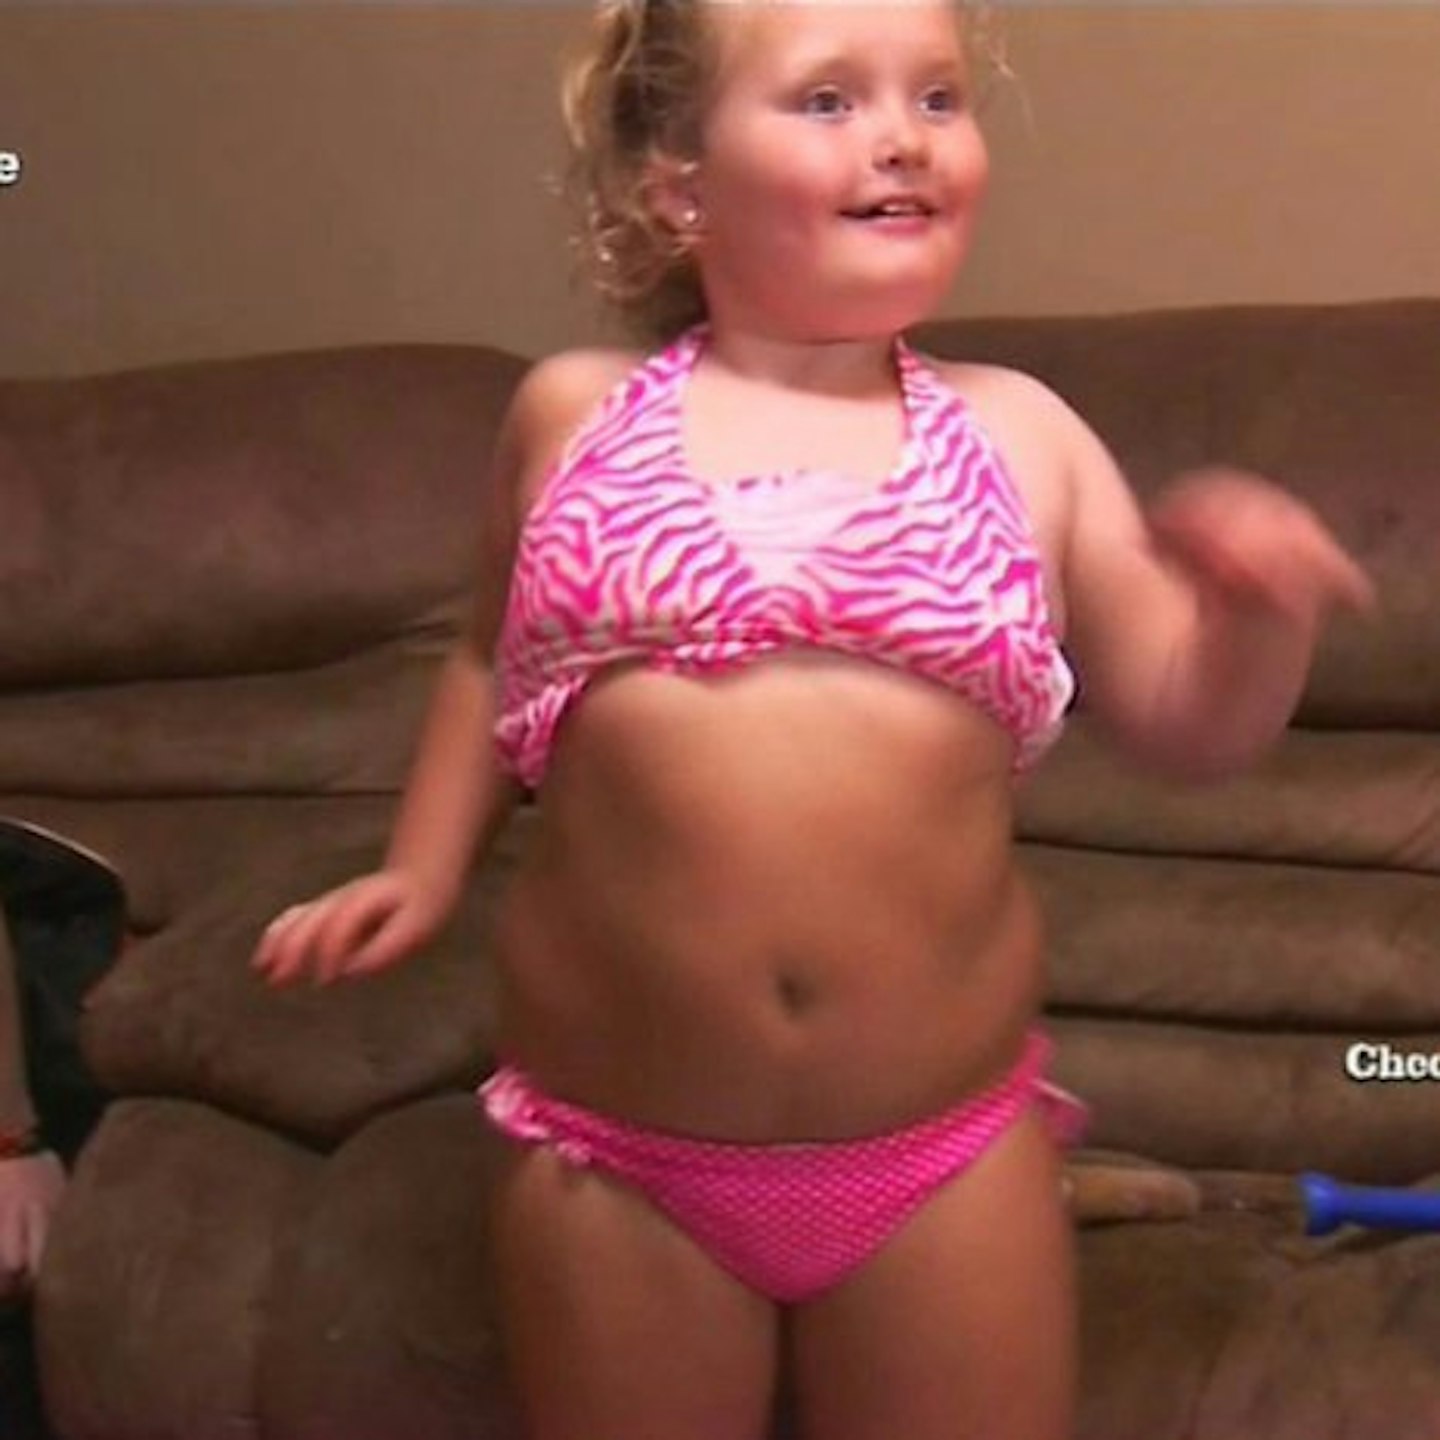 Alana 'Honey Boo Boo' Thompson getting a spray tan in a recent episode of her hit show